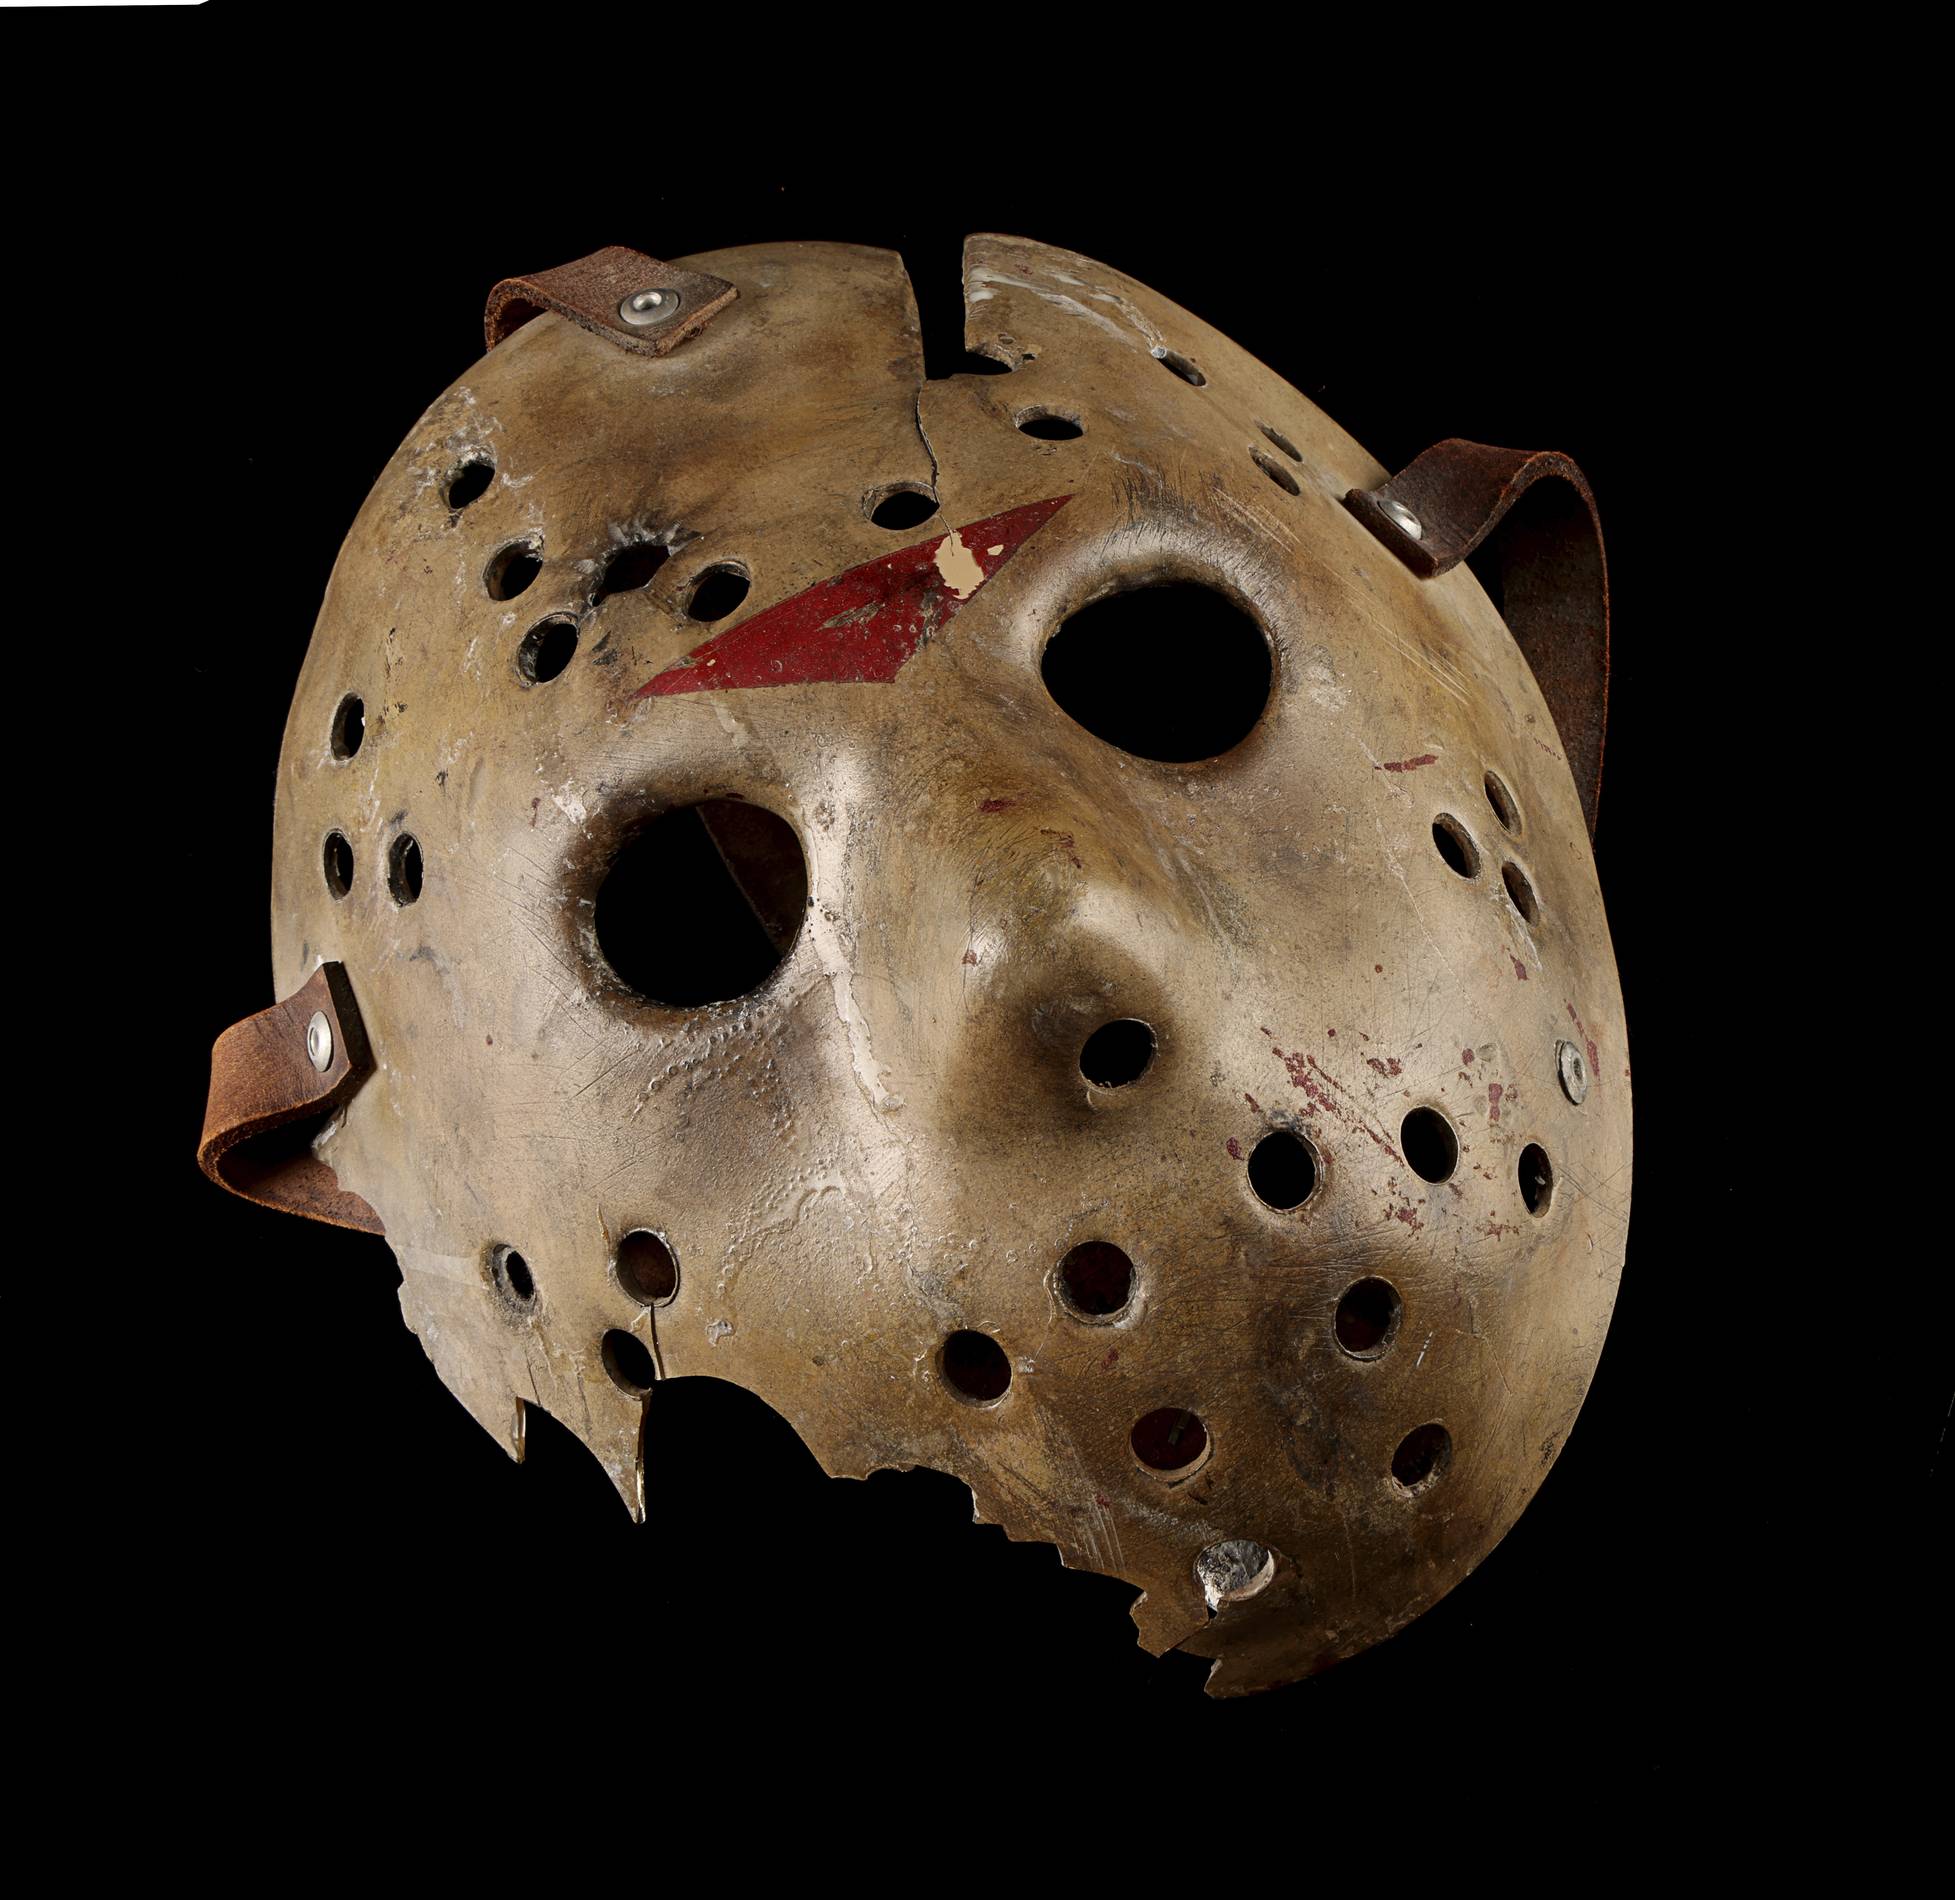 Jason Voorhees' mask from Friday The 13th Part VI: Jason Lives